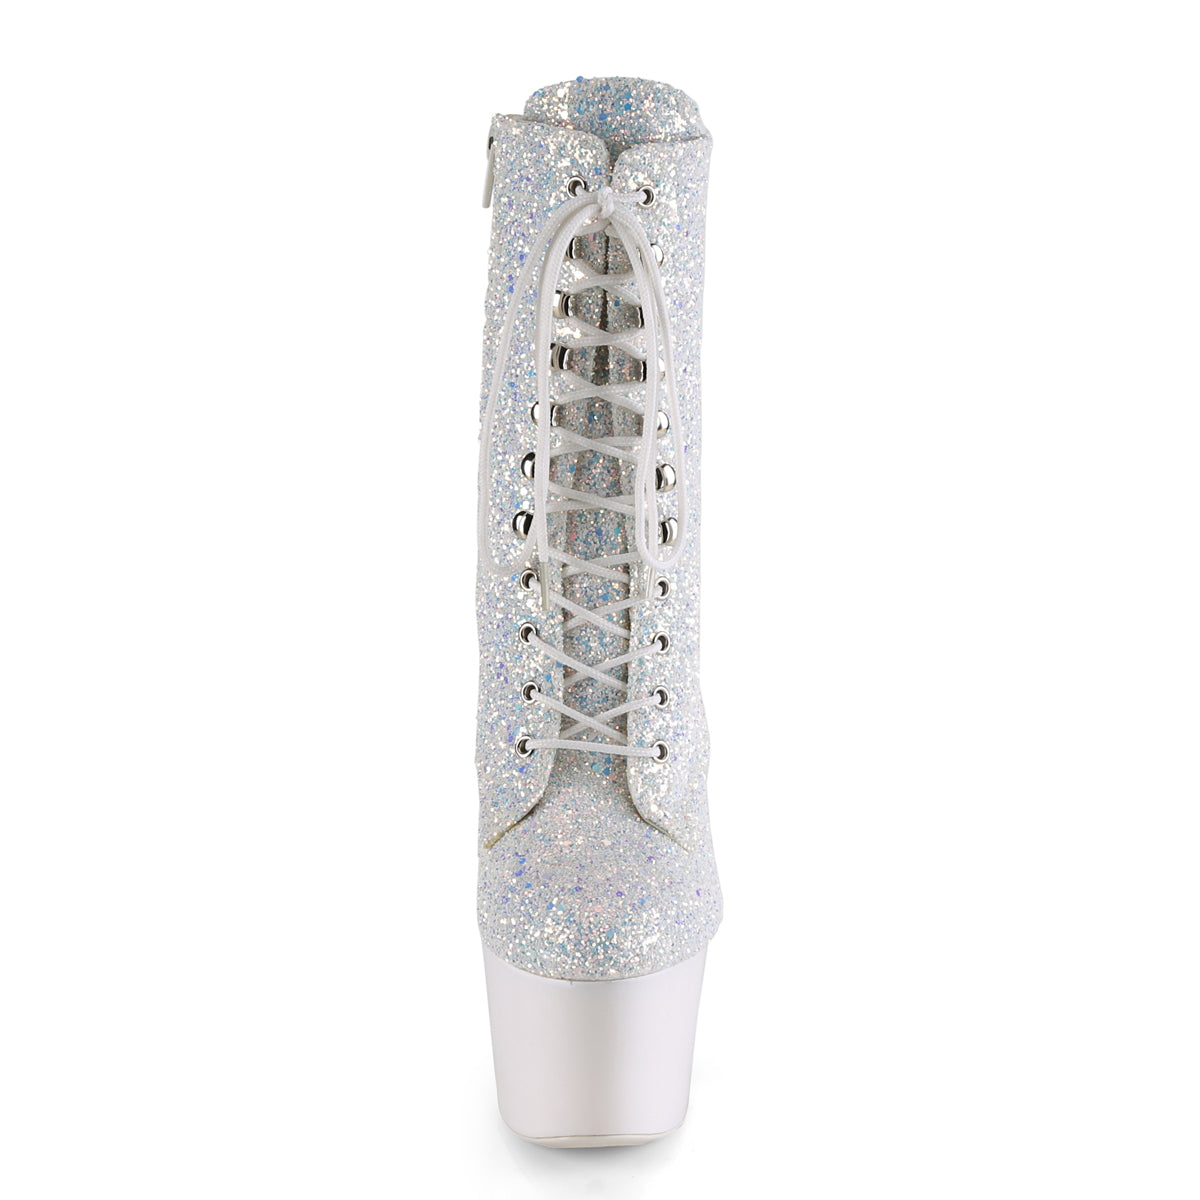 ADORE-1020LG 7" Heel Neon White Glitter Dancing Ankle Boots-Pleaser- Sexy Shoes Alternative Footwear